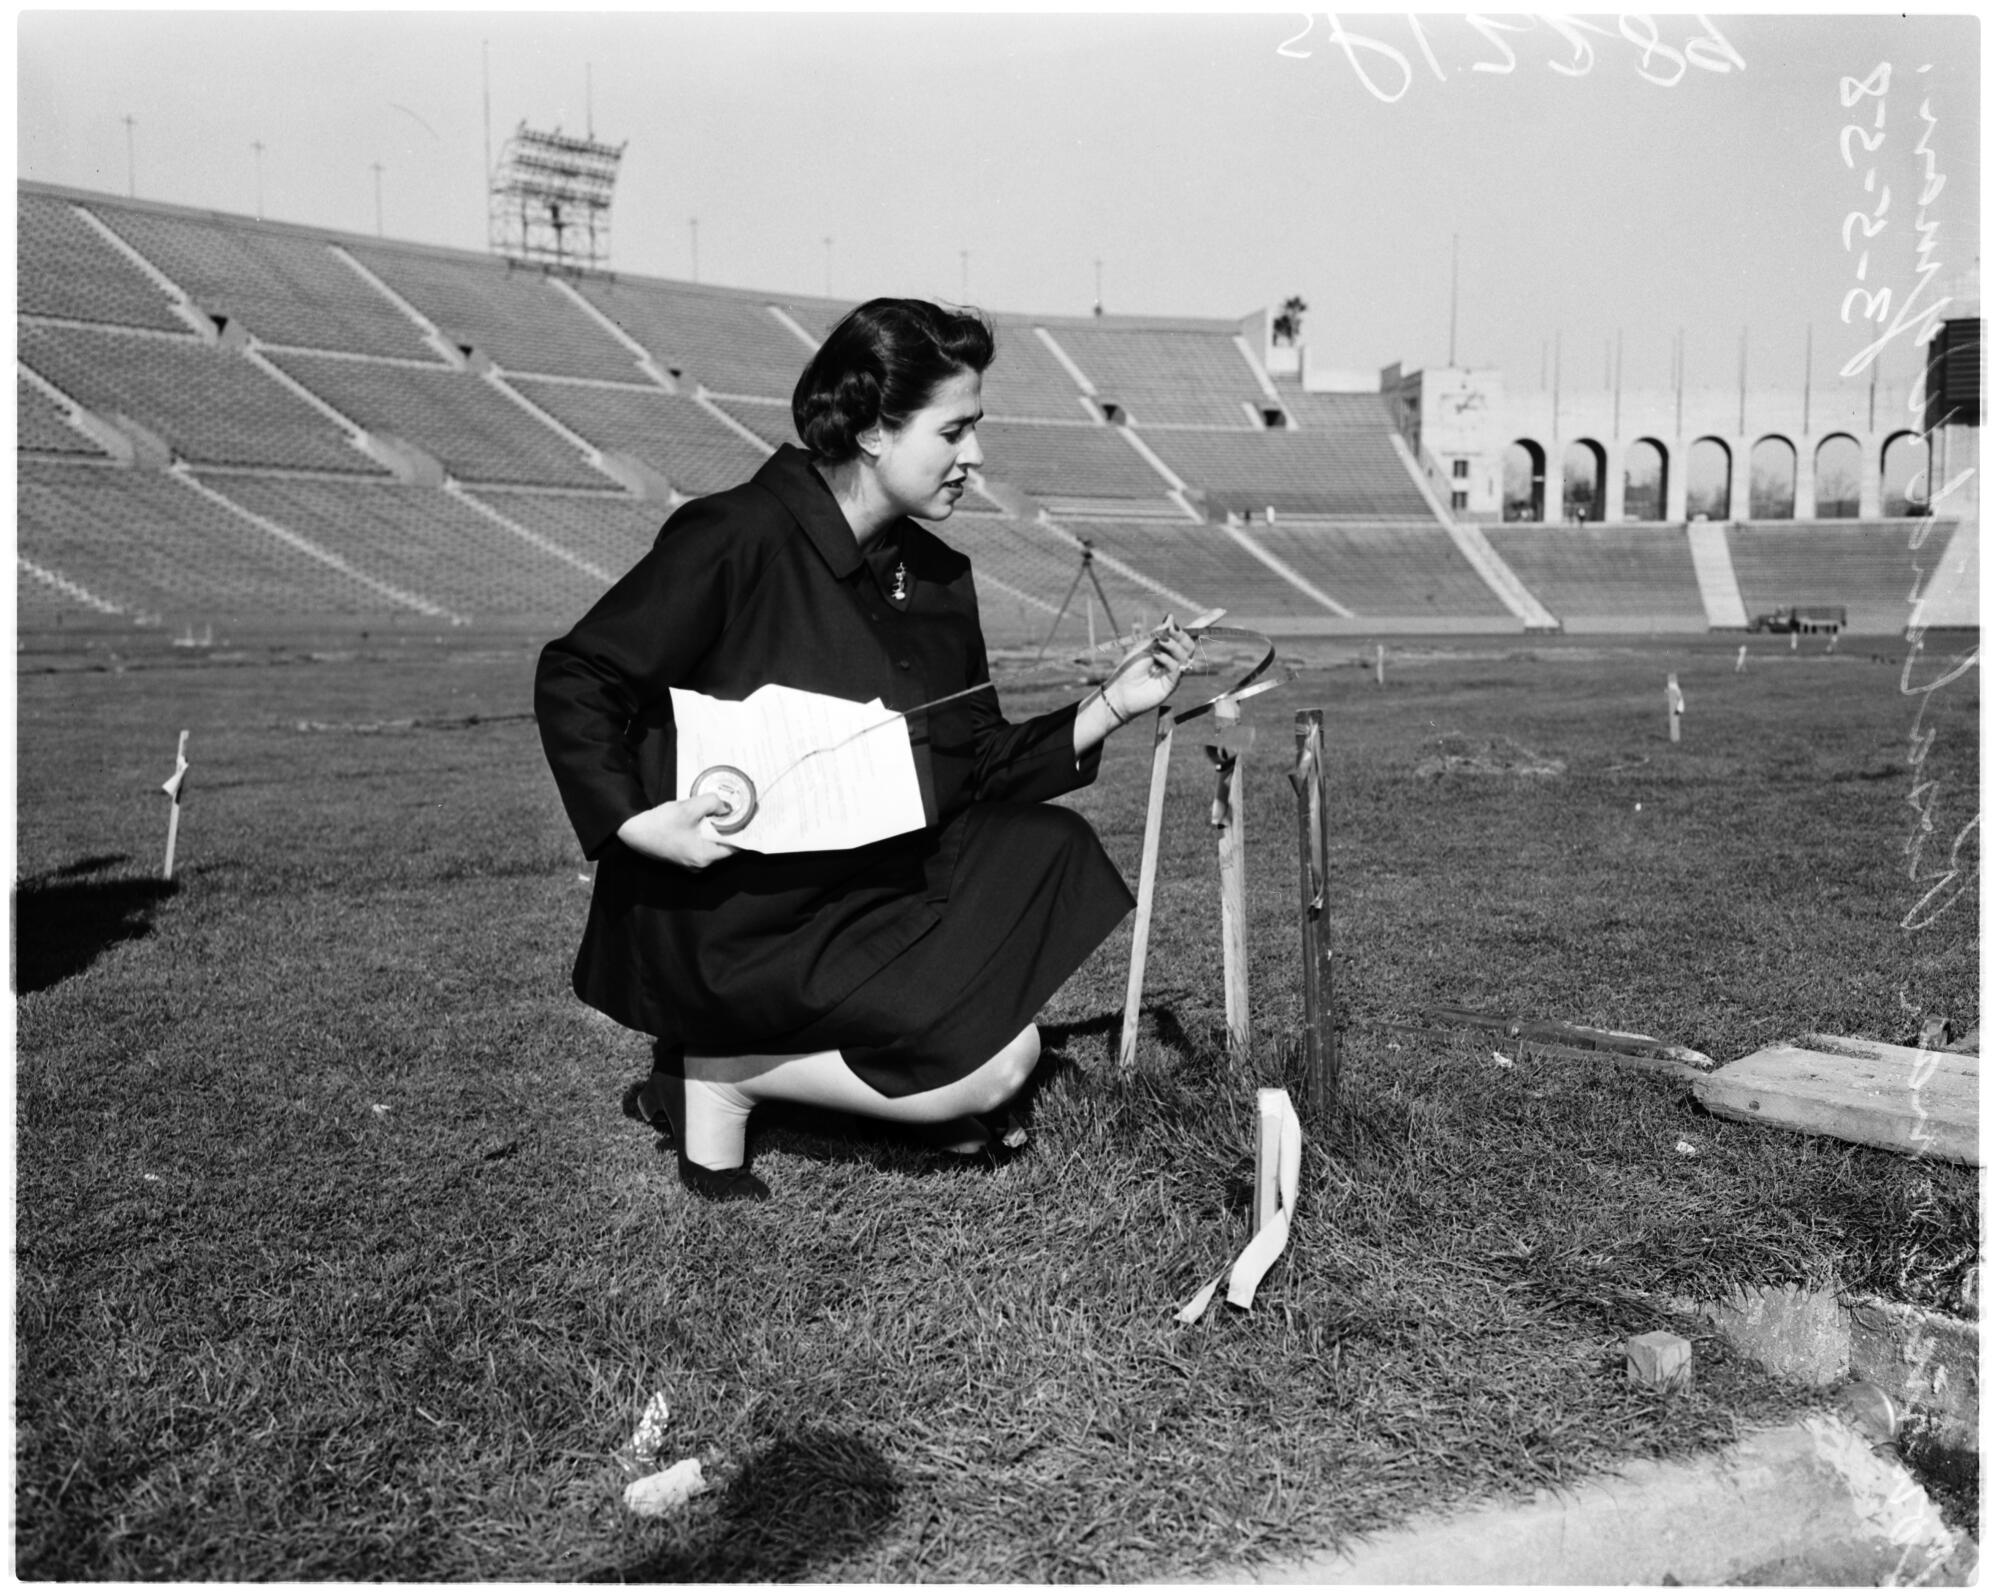 A woman crouches near some sticks standing upright in the grass in a stadium.